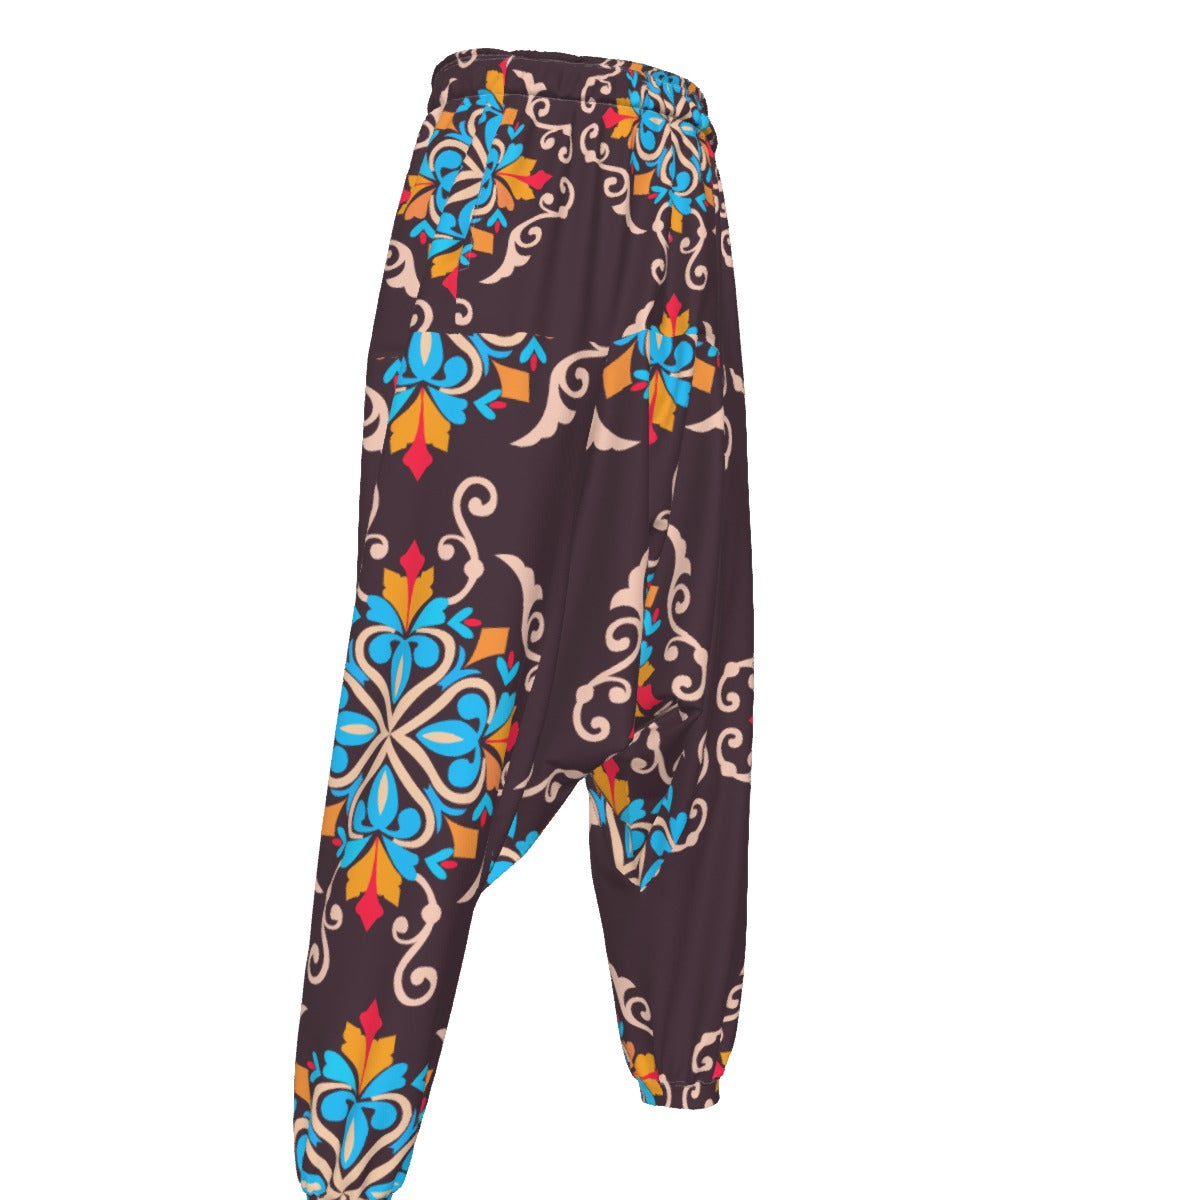 Hippie Pants Meditation and Yoga Trousers - Personal Hour for Yoga and Meditations 